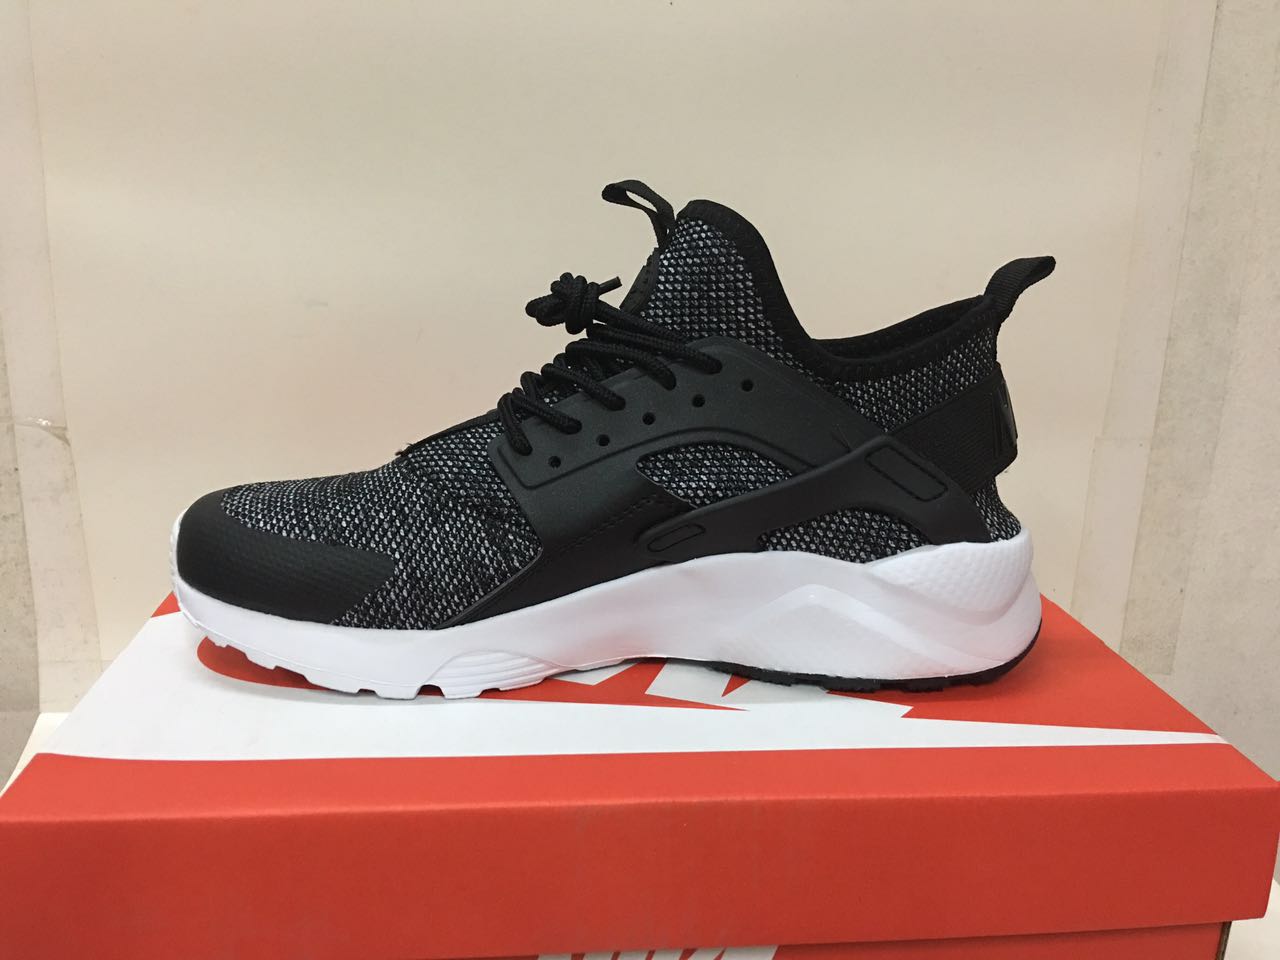 Nike Air Huarache 6 Flyknit Black White Shoes - Click Image to Close